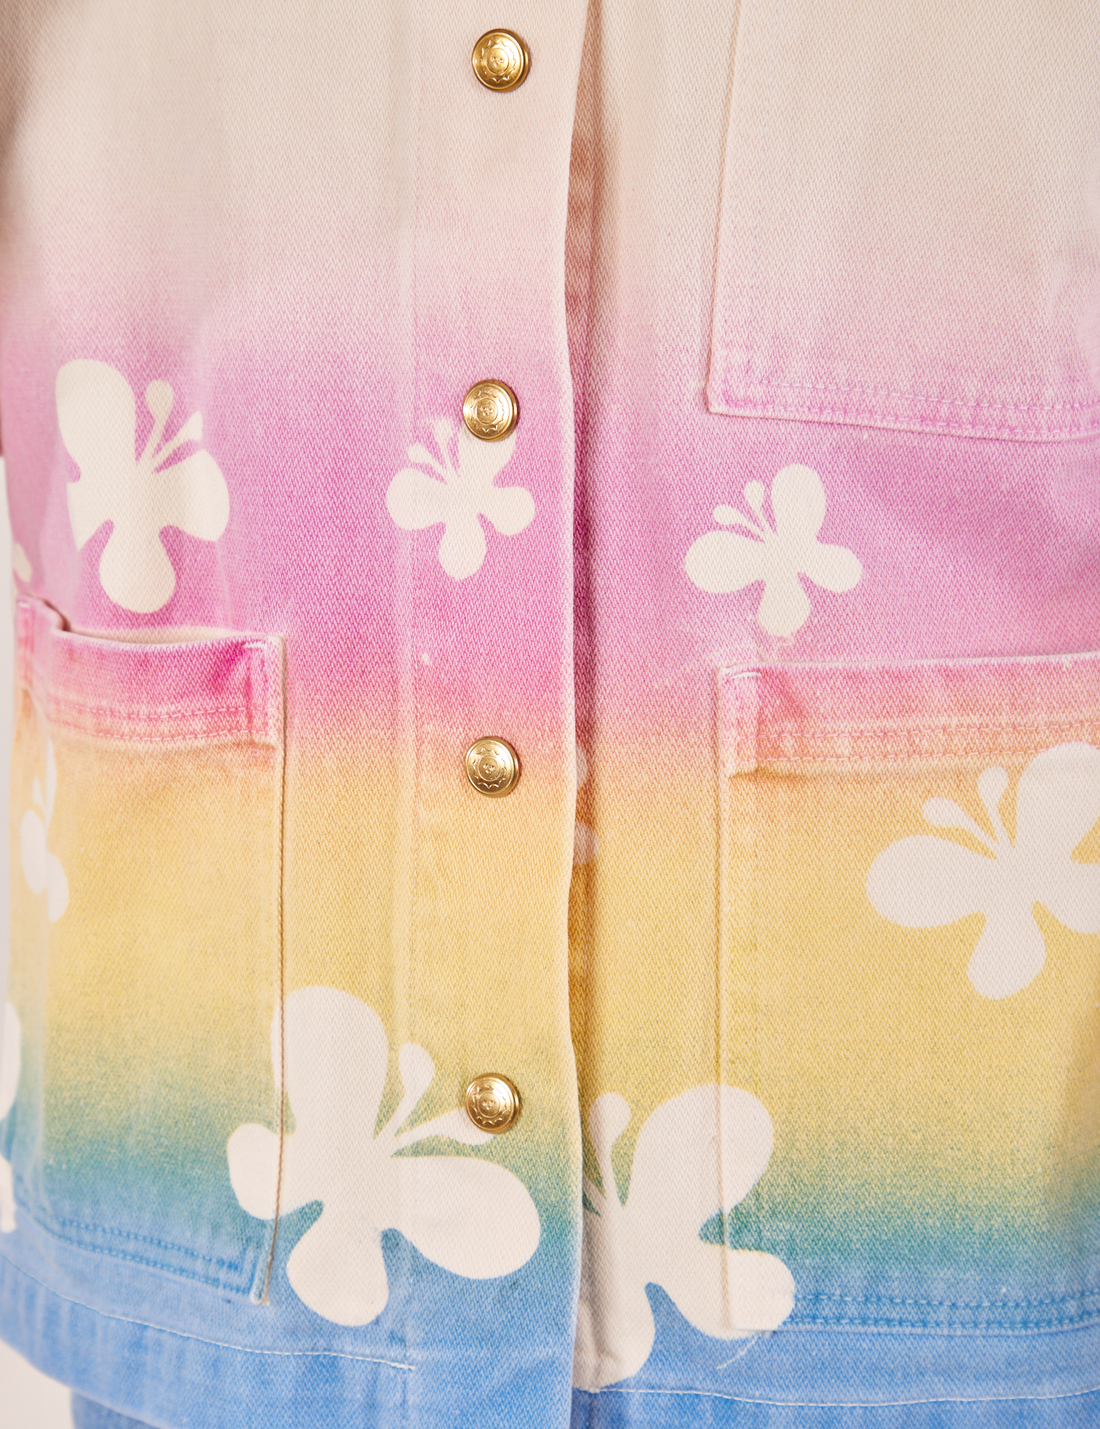 Work Jacket in Butterfly Airbrush front close up. Airbrush gradient in blue, yellow, and pink with butterfly silhouettes.